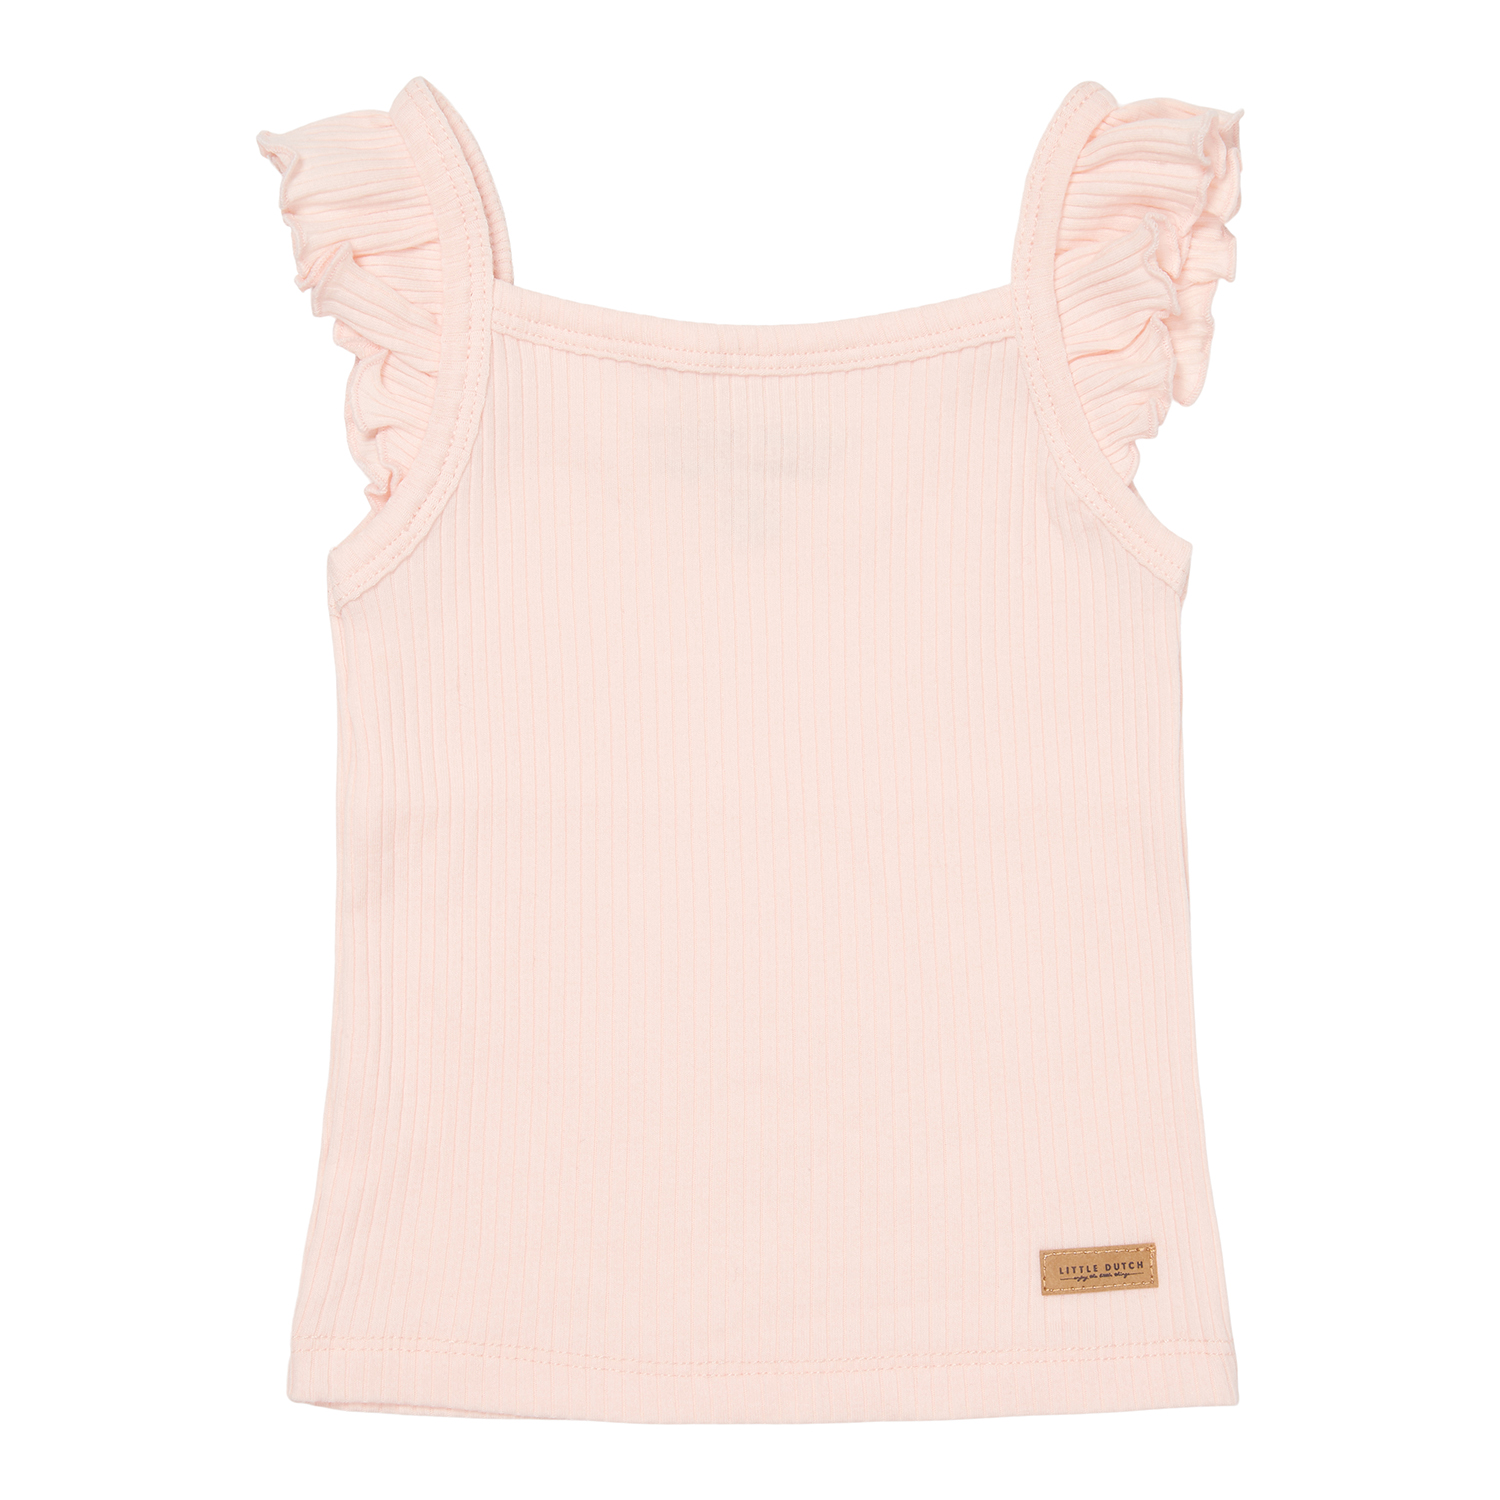 Top mit Volants Rippe Pure soft pink (Gr. 68)